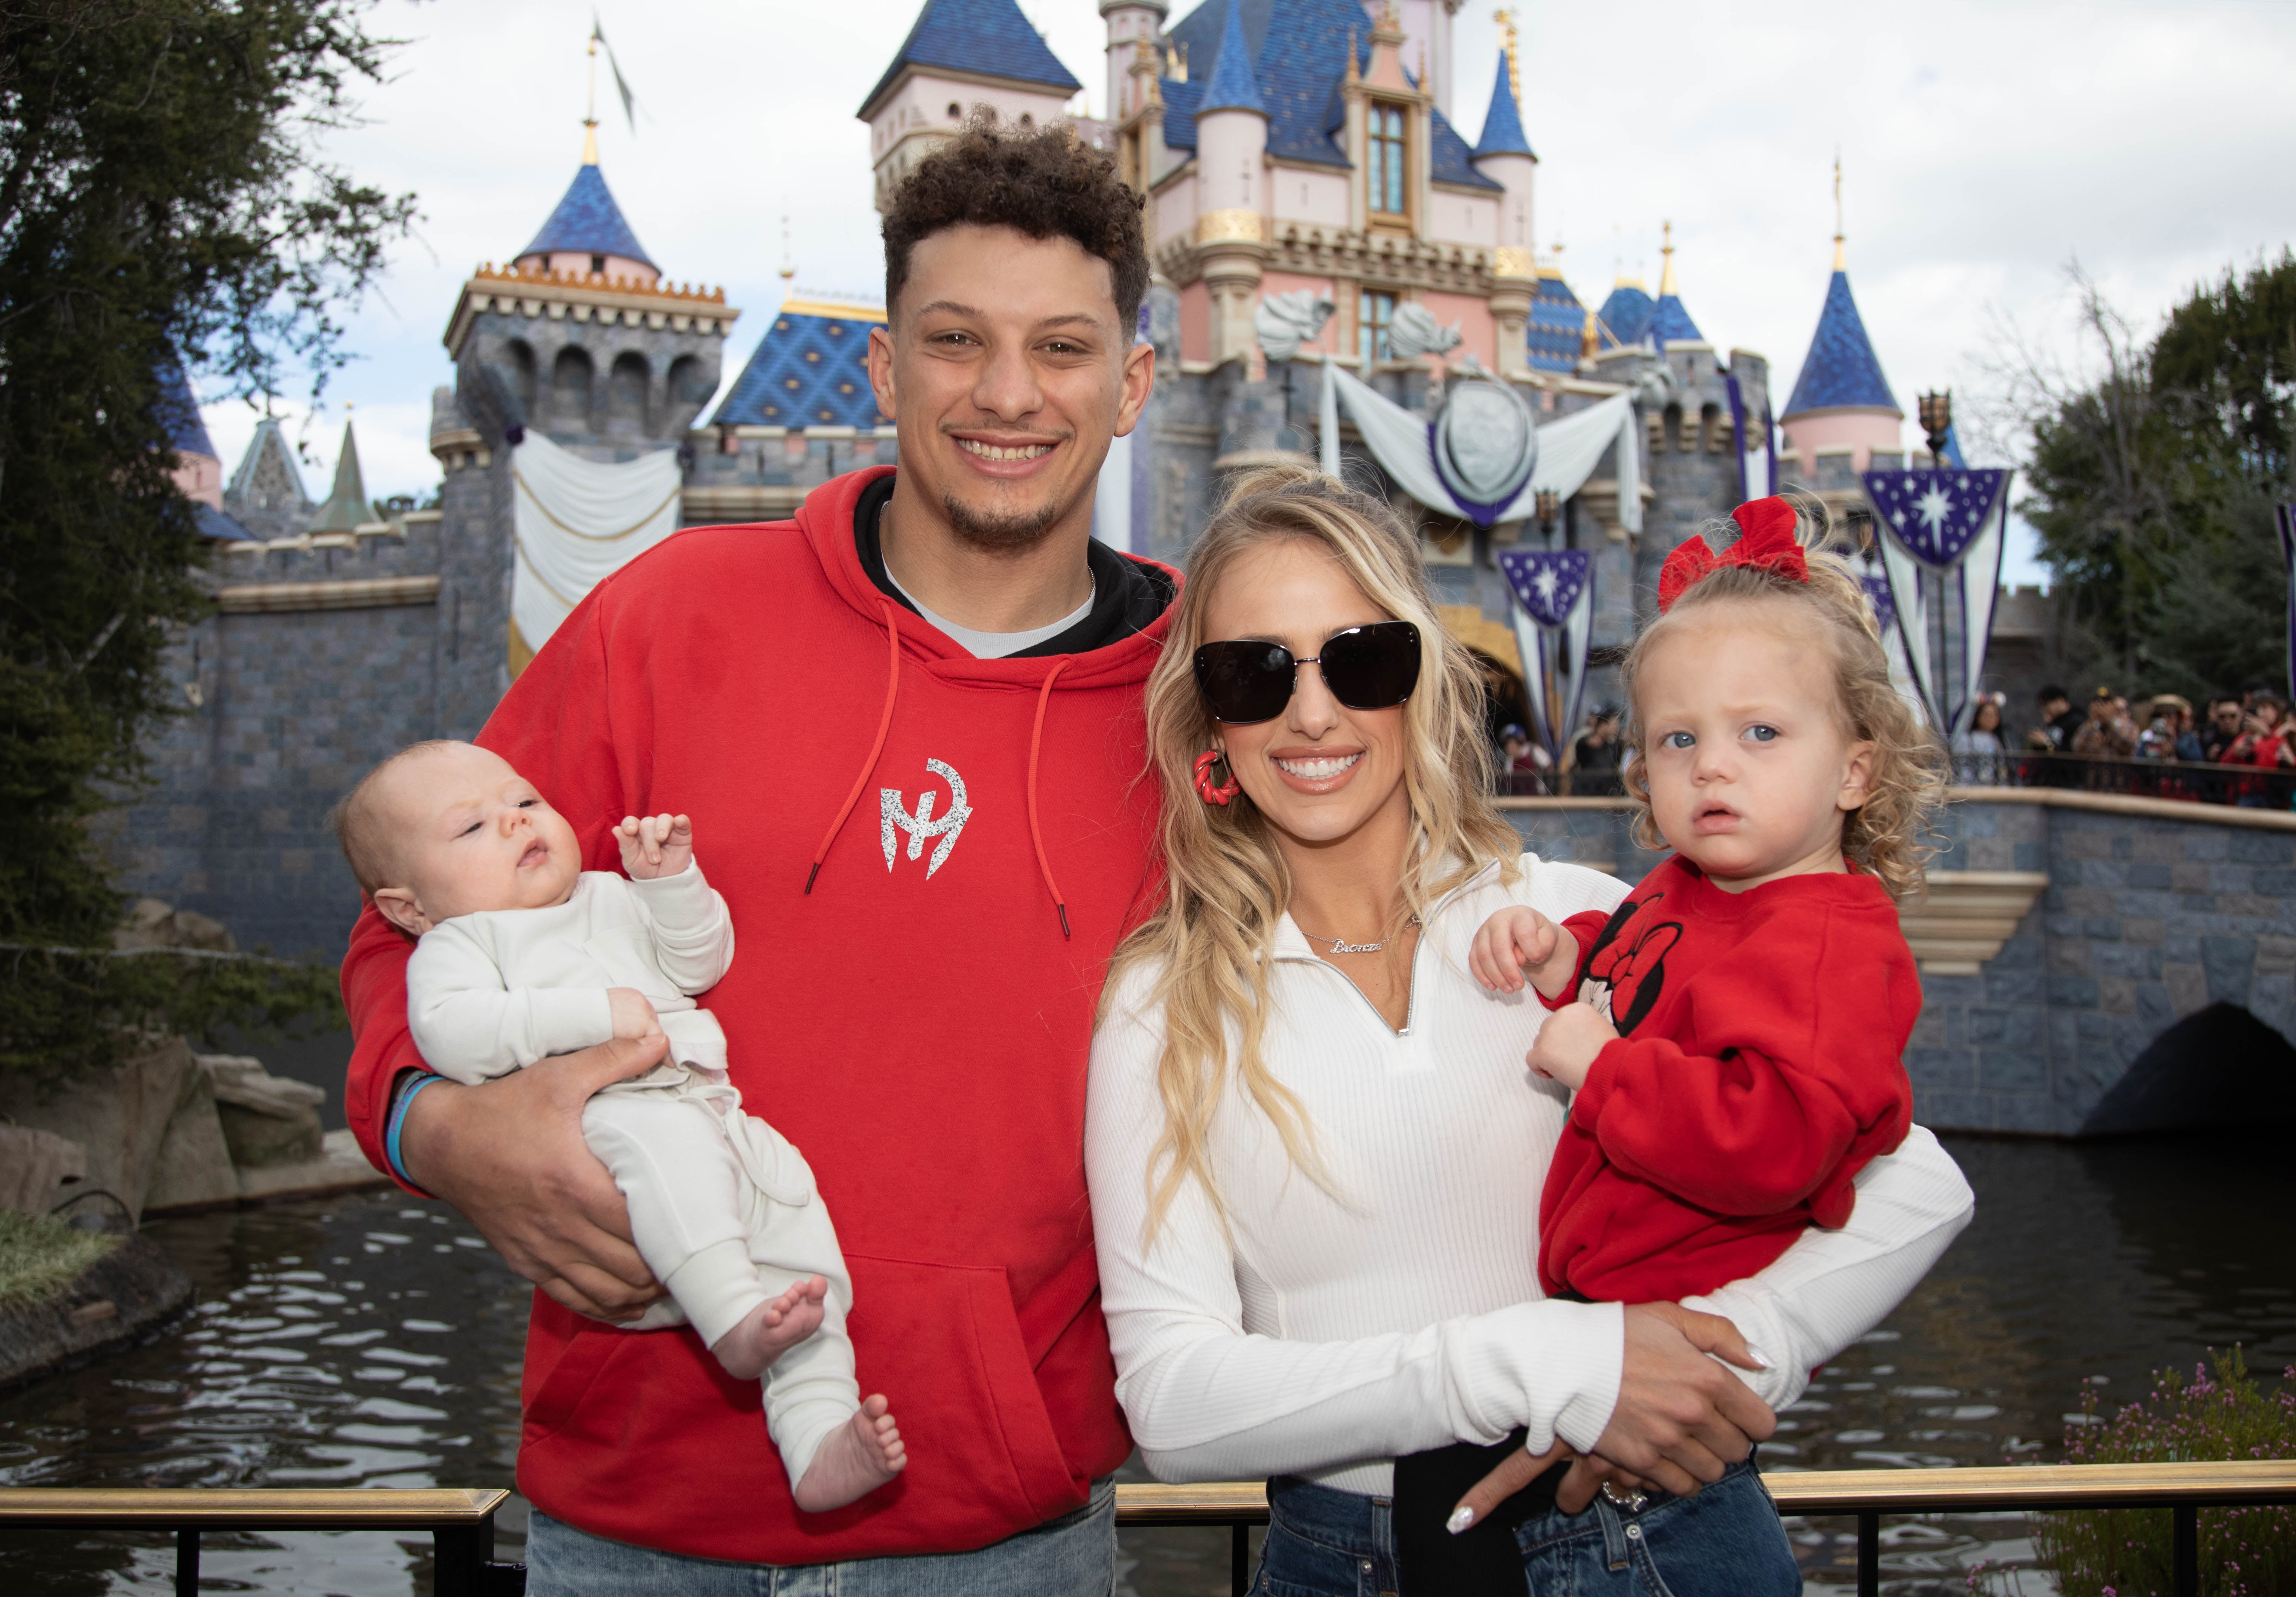 Patrick Mahomes & Wife Brittany Welcome Second Child - See His